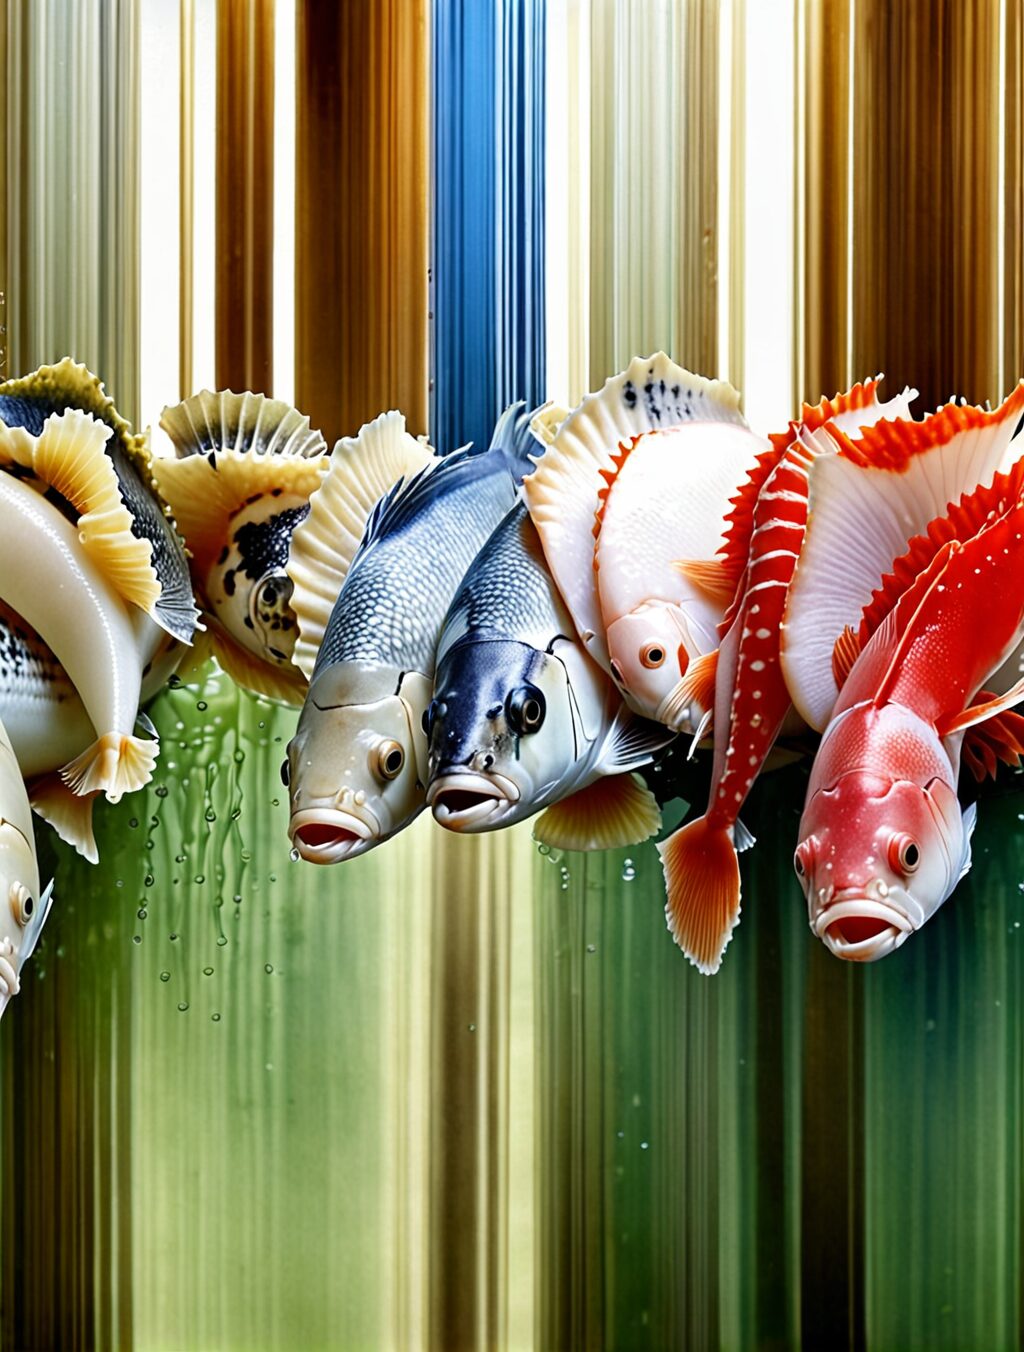 poisonous sea delicacy eaten in japan with care